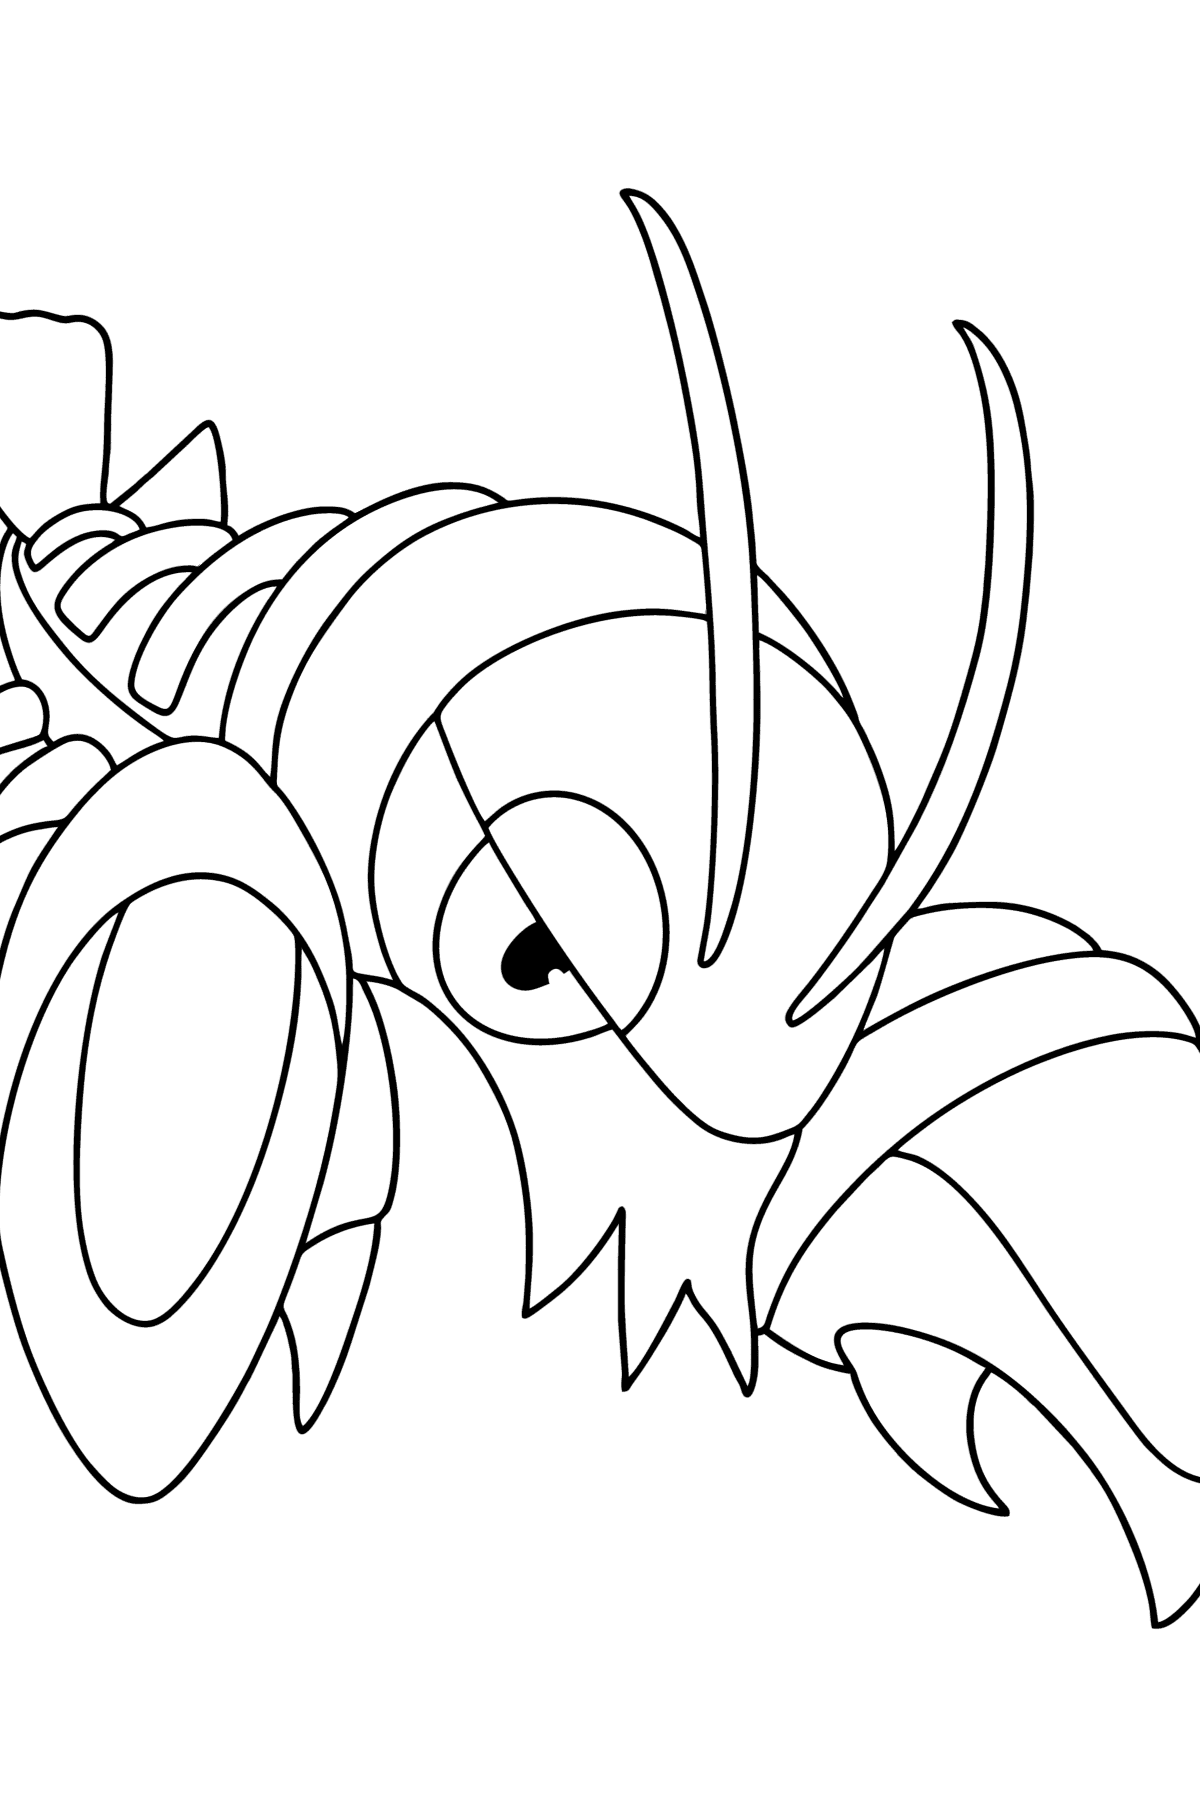 Colouring page Pokémon X and Y Clauncher - Coloring Pages for Kids